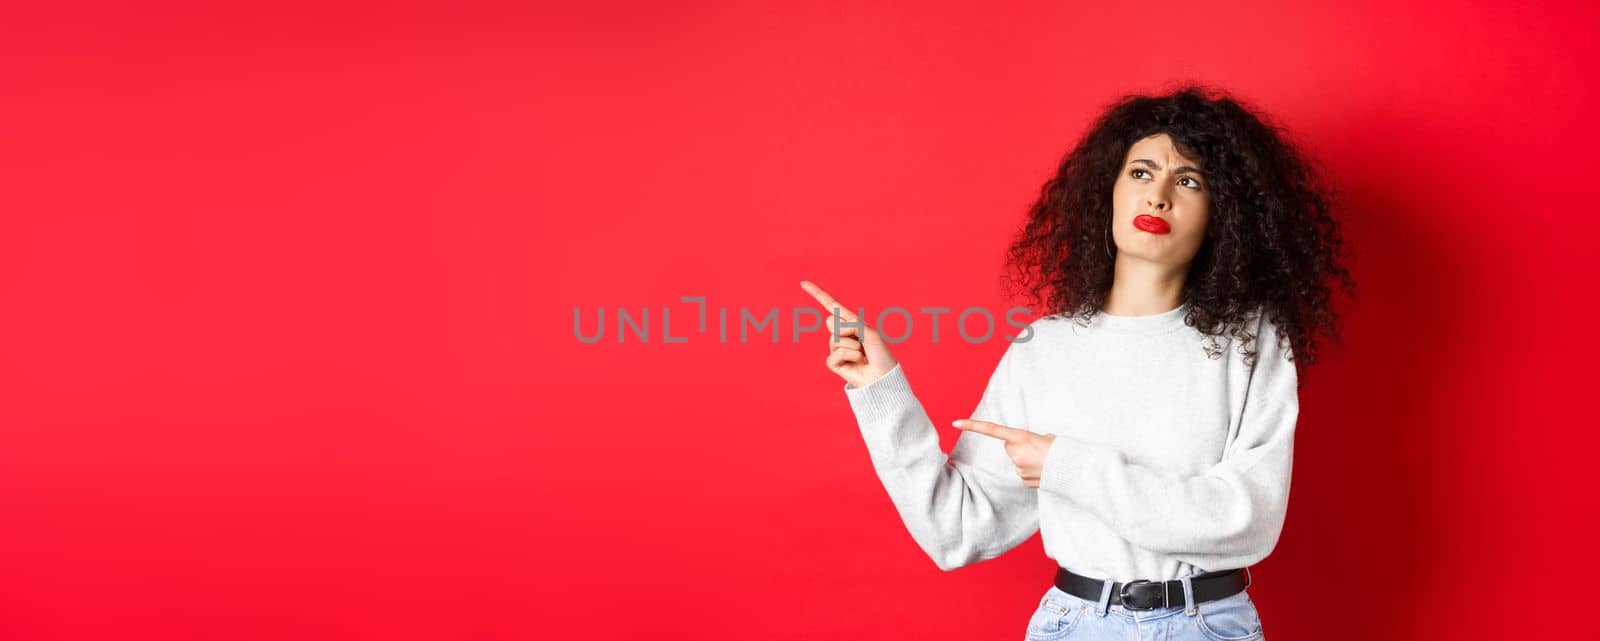 Skeptical frowning girl with curly hair, pointing and looking left hesitant, standing upset on red background.